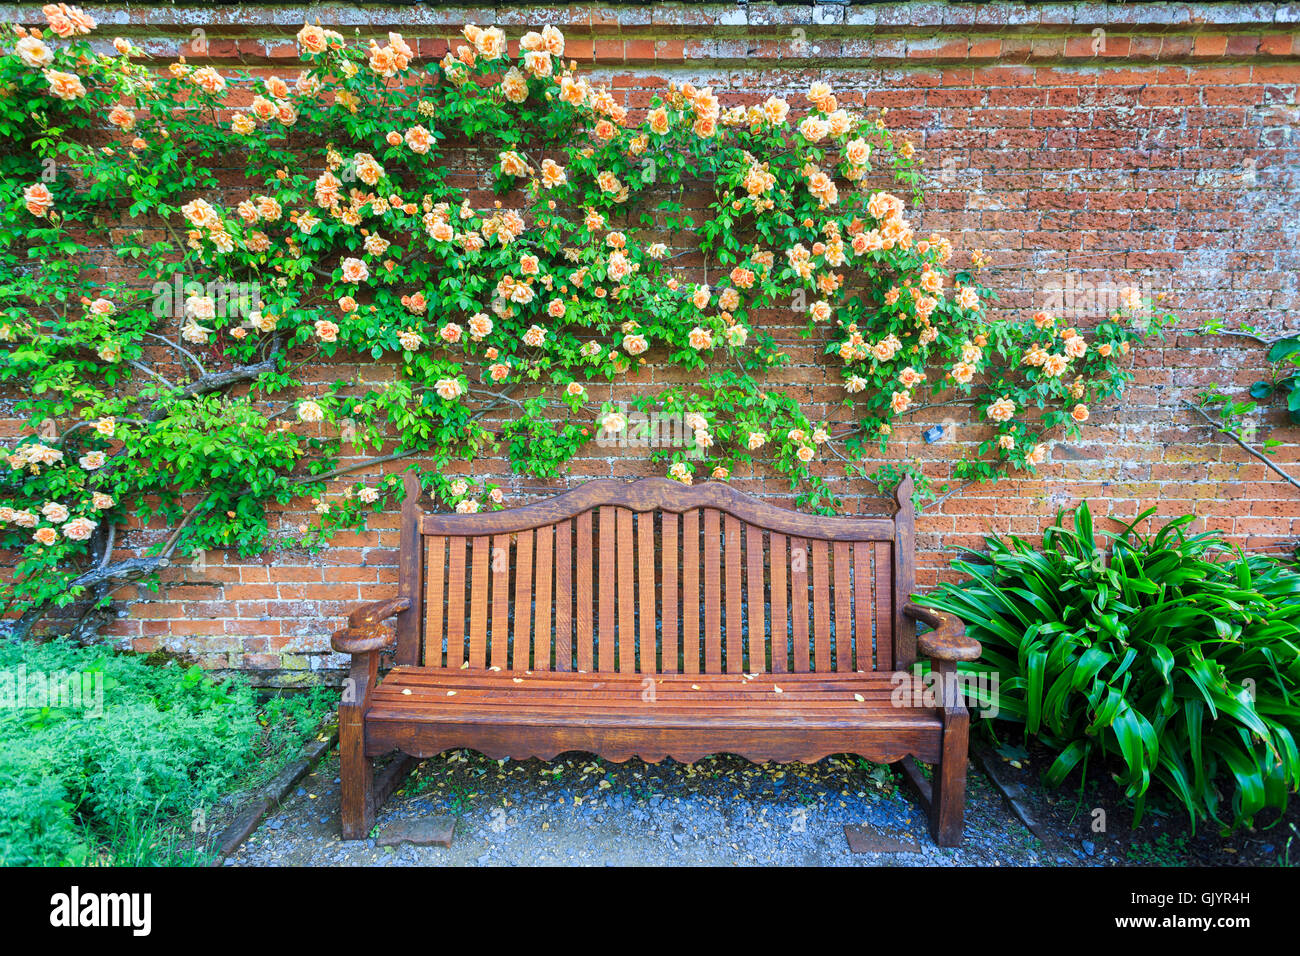 Apricot-yellow climbing rose 'Crepuscule' growing against a brick wall over a wooden garden bench in summer Stock Photo